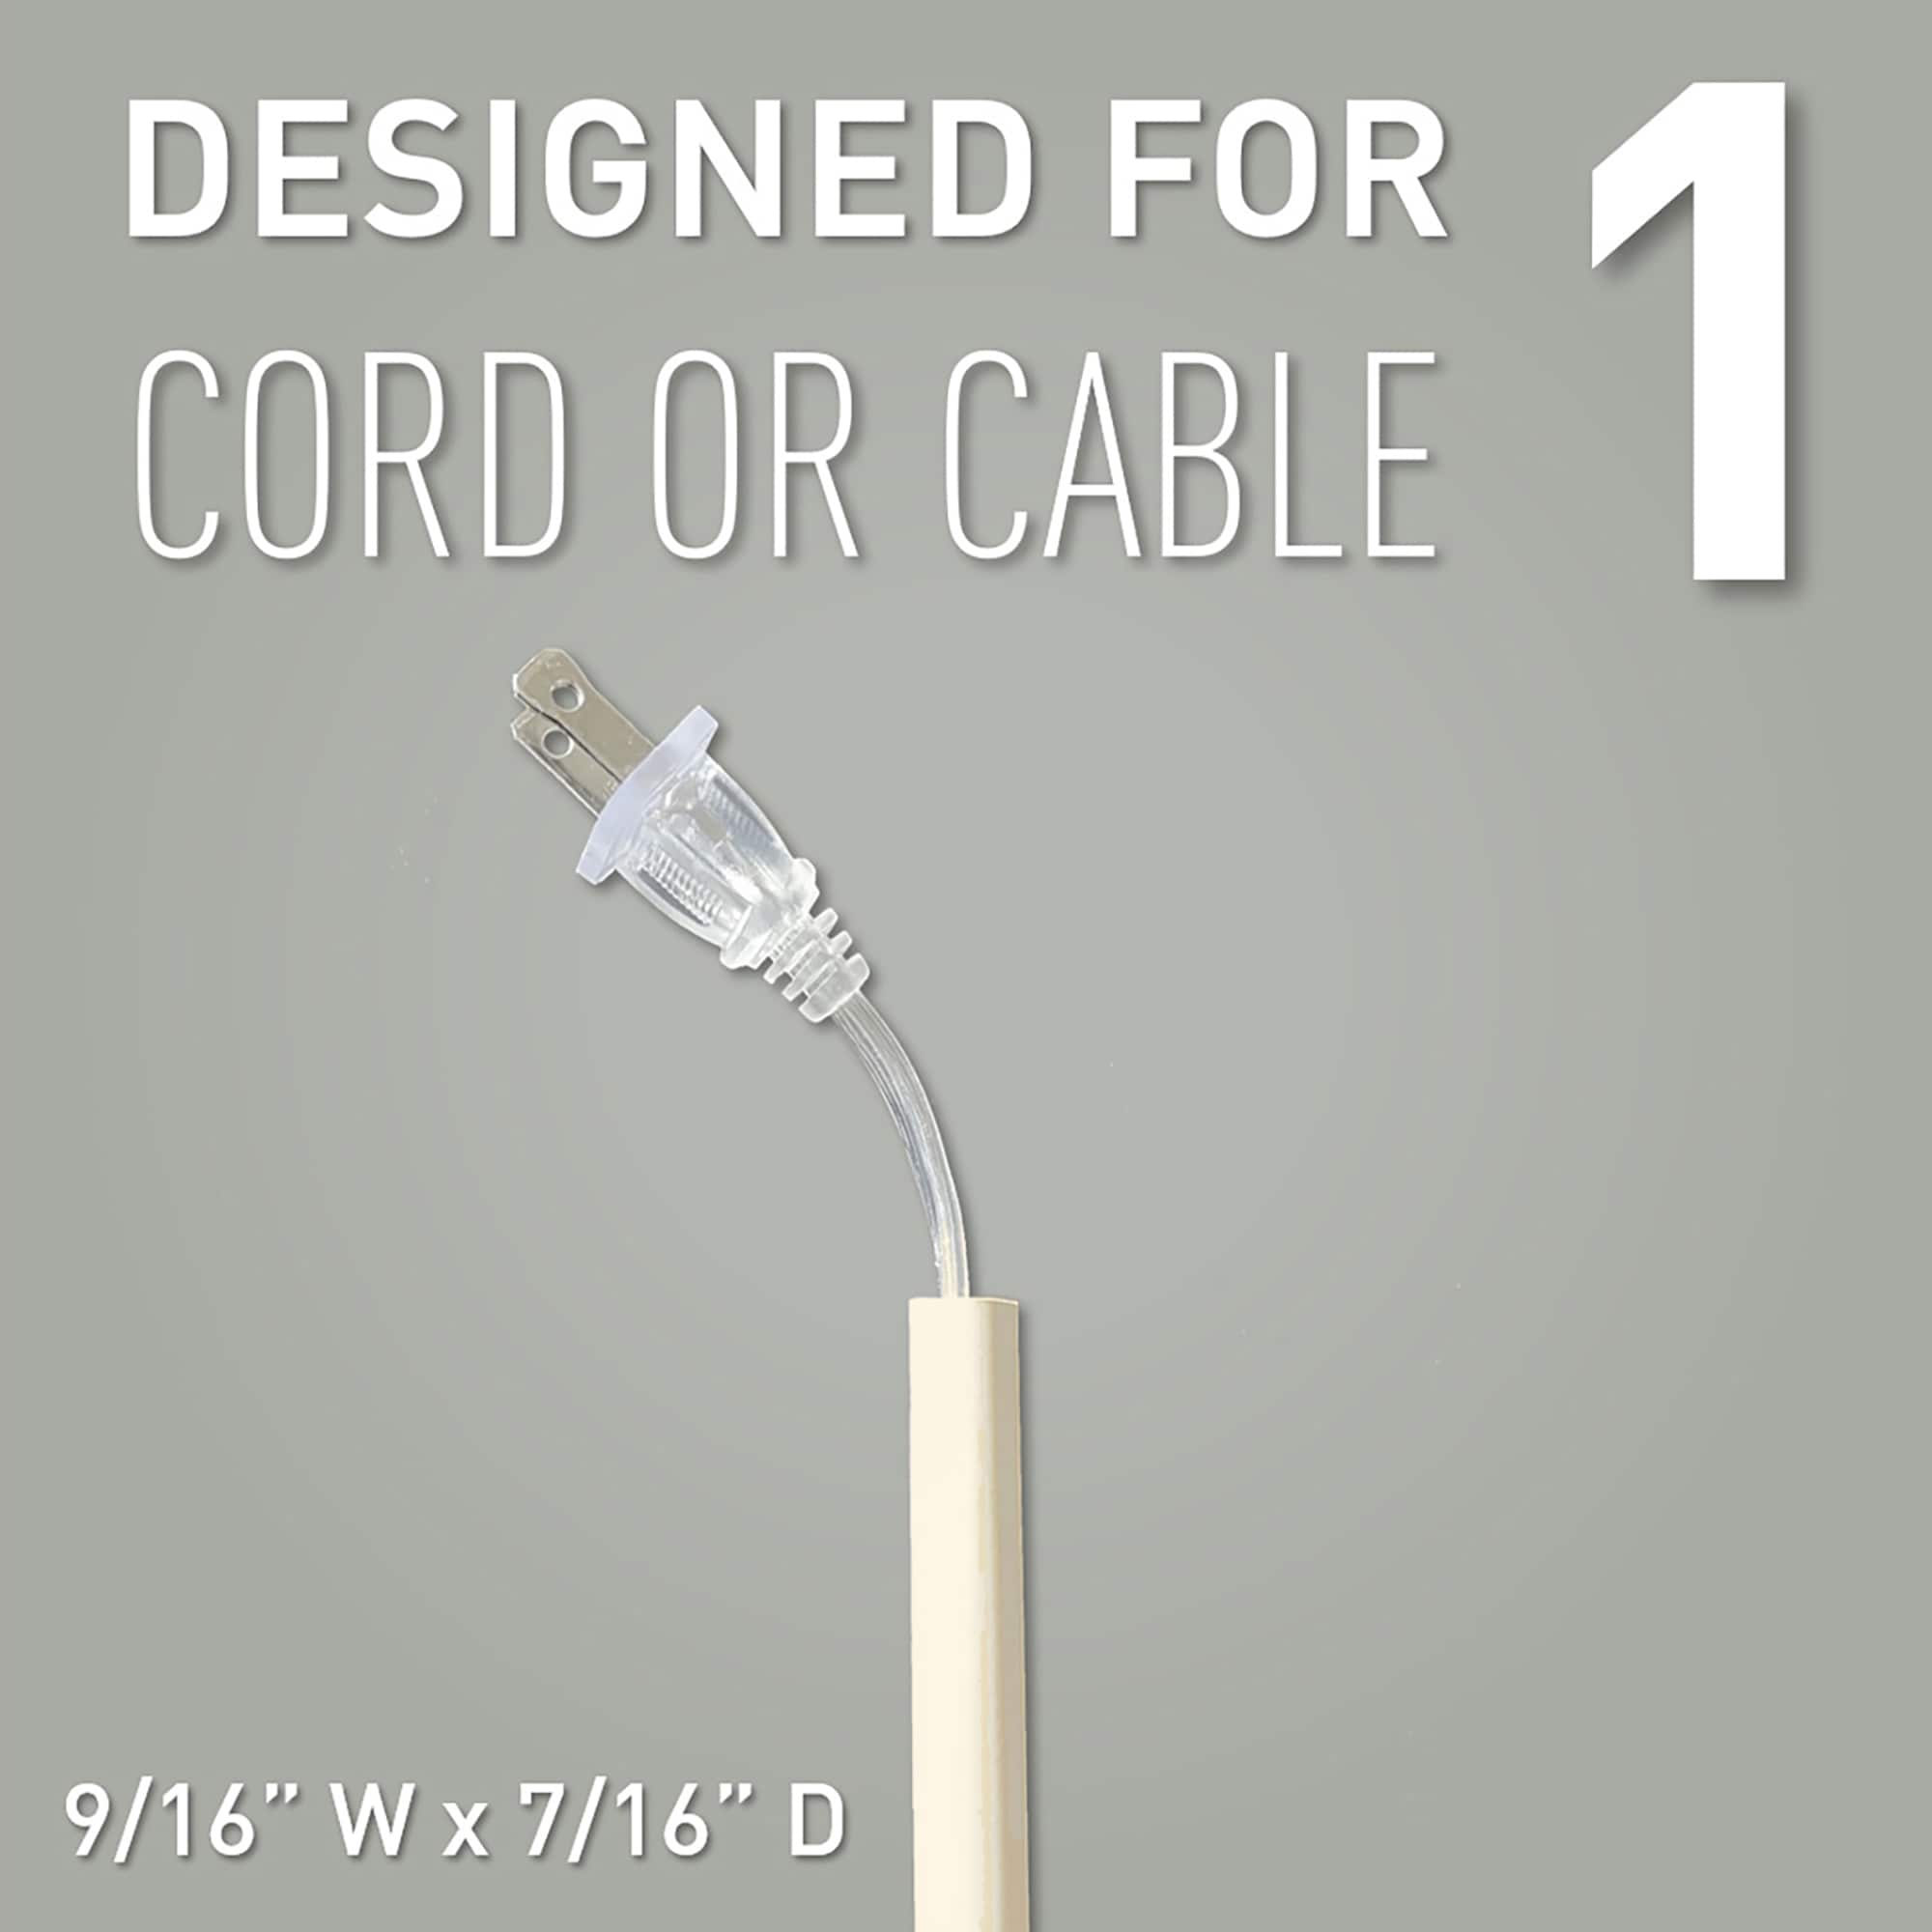 Legrand Wiremold Cordmate II Cord Cover 12 ft. Kit, Cord Hider for